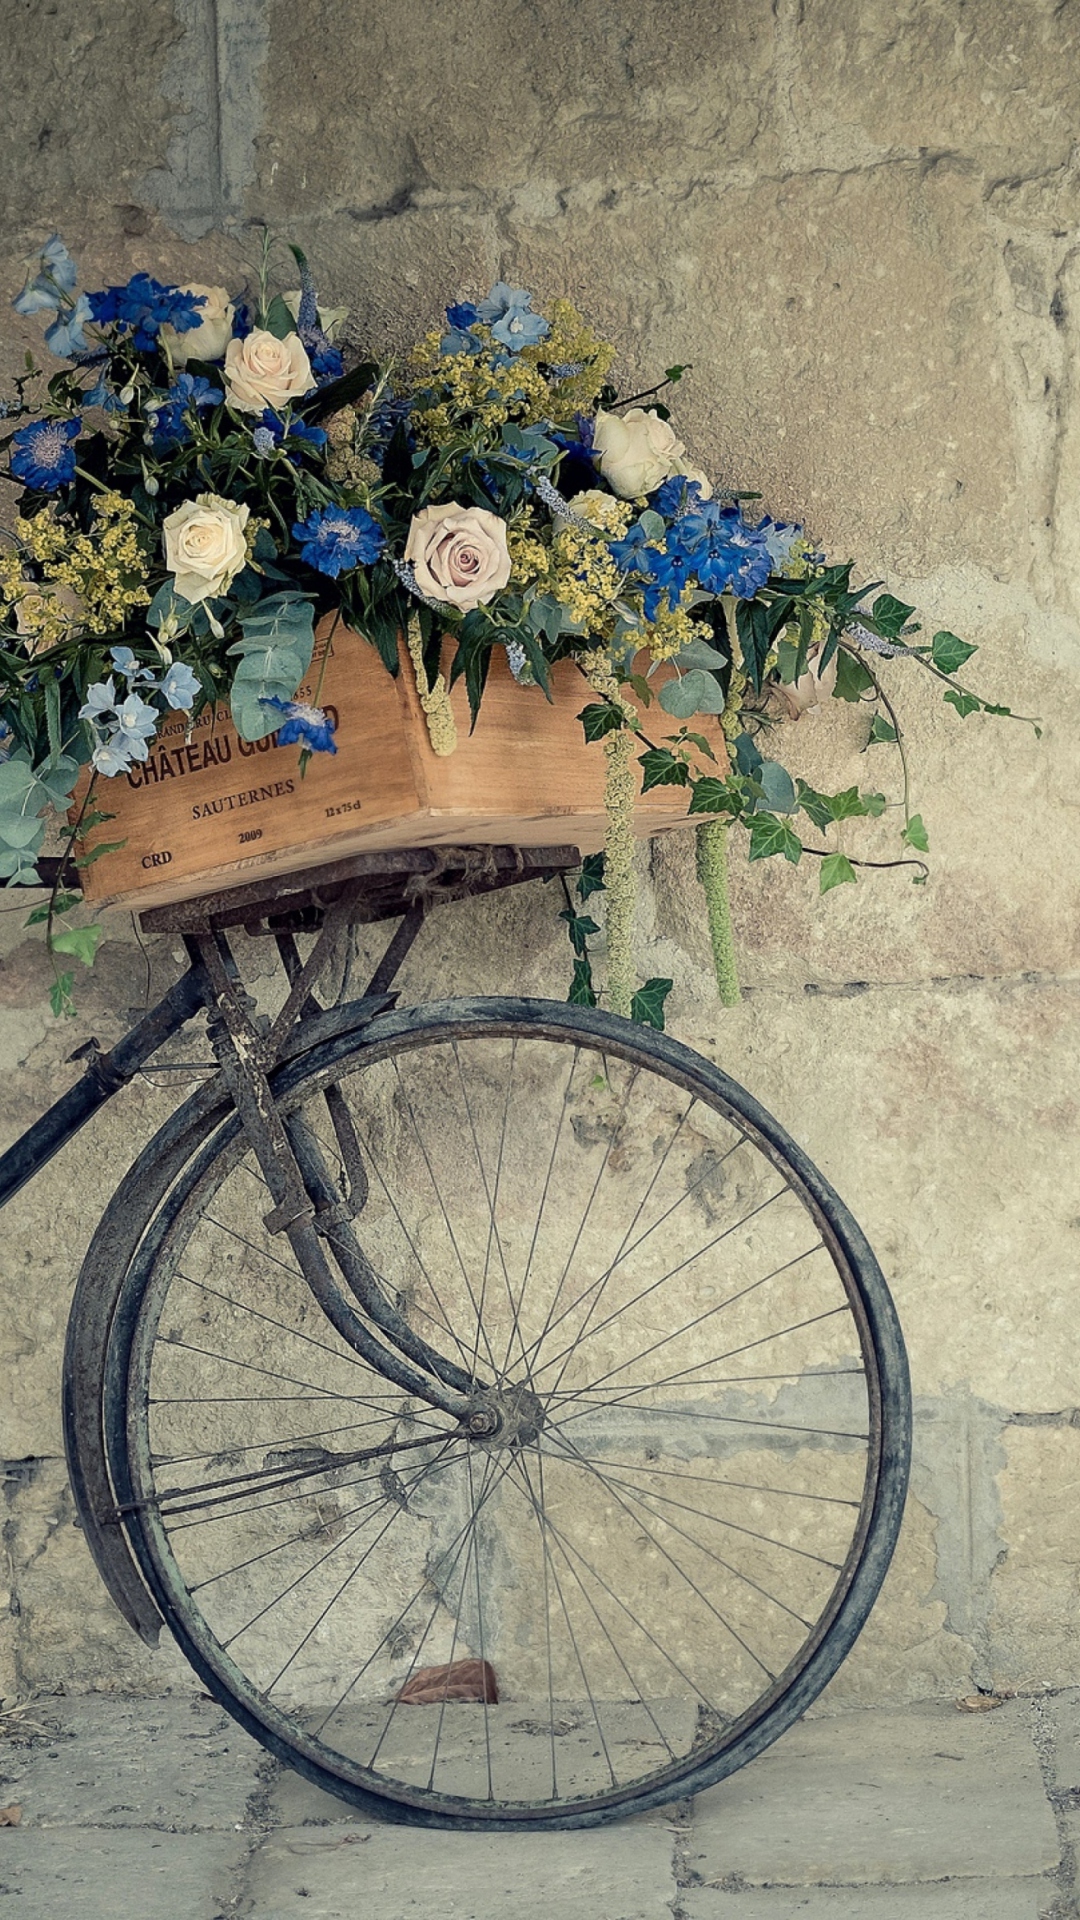 Bicycle With Basket Full Of Flowers screenshot #1 1080x1920